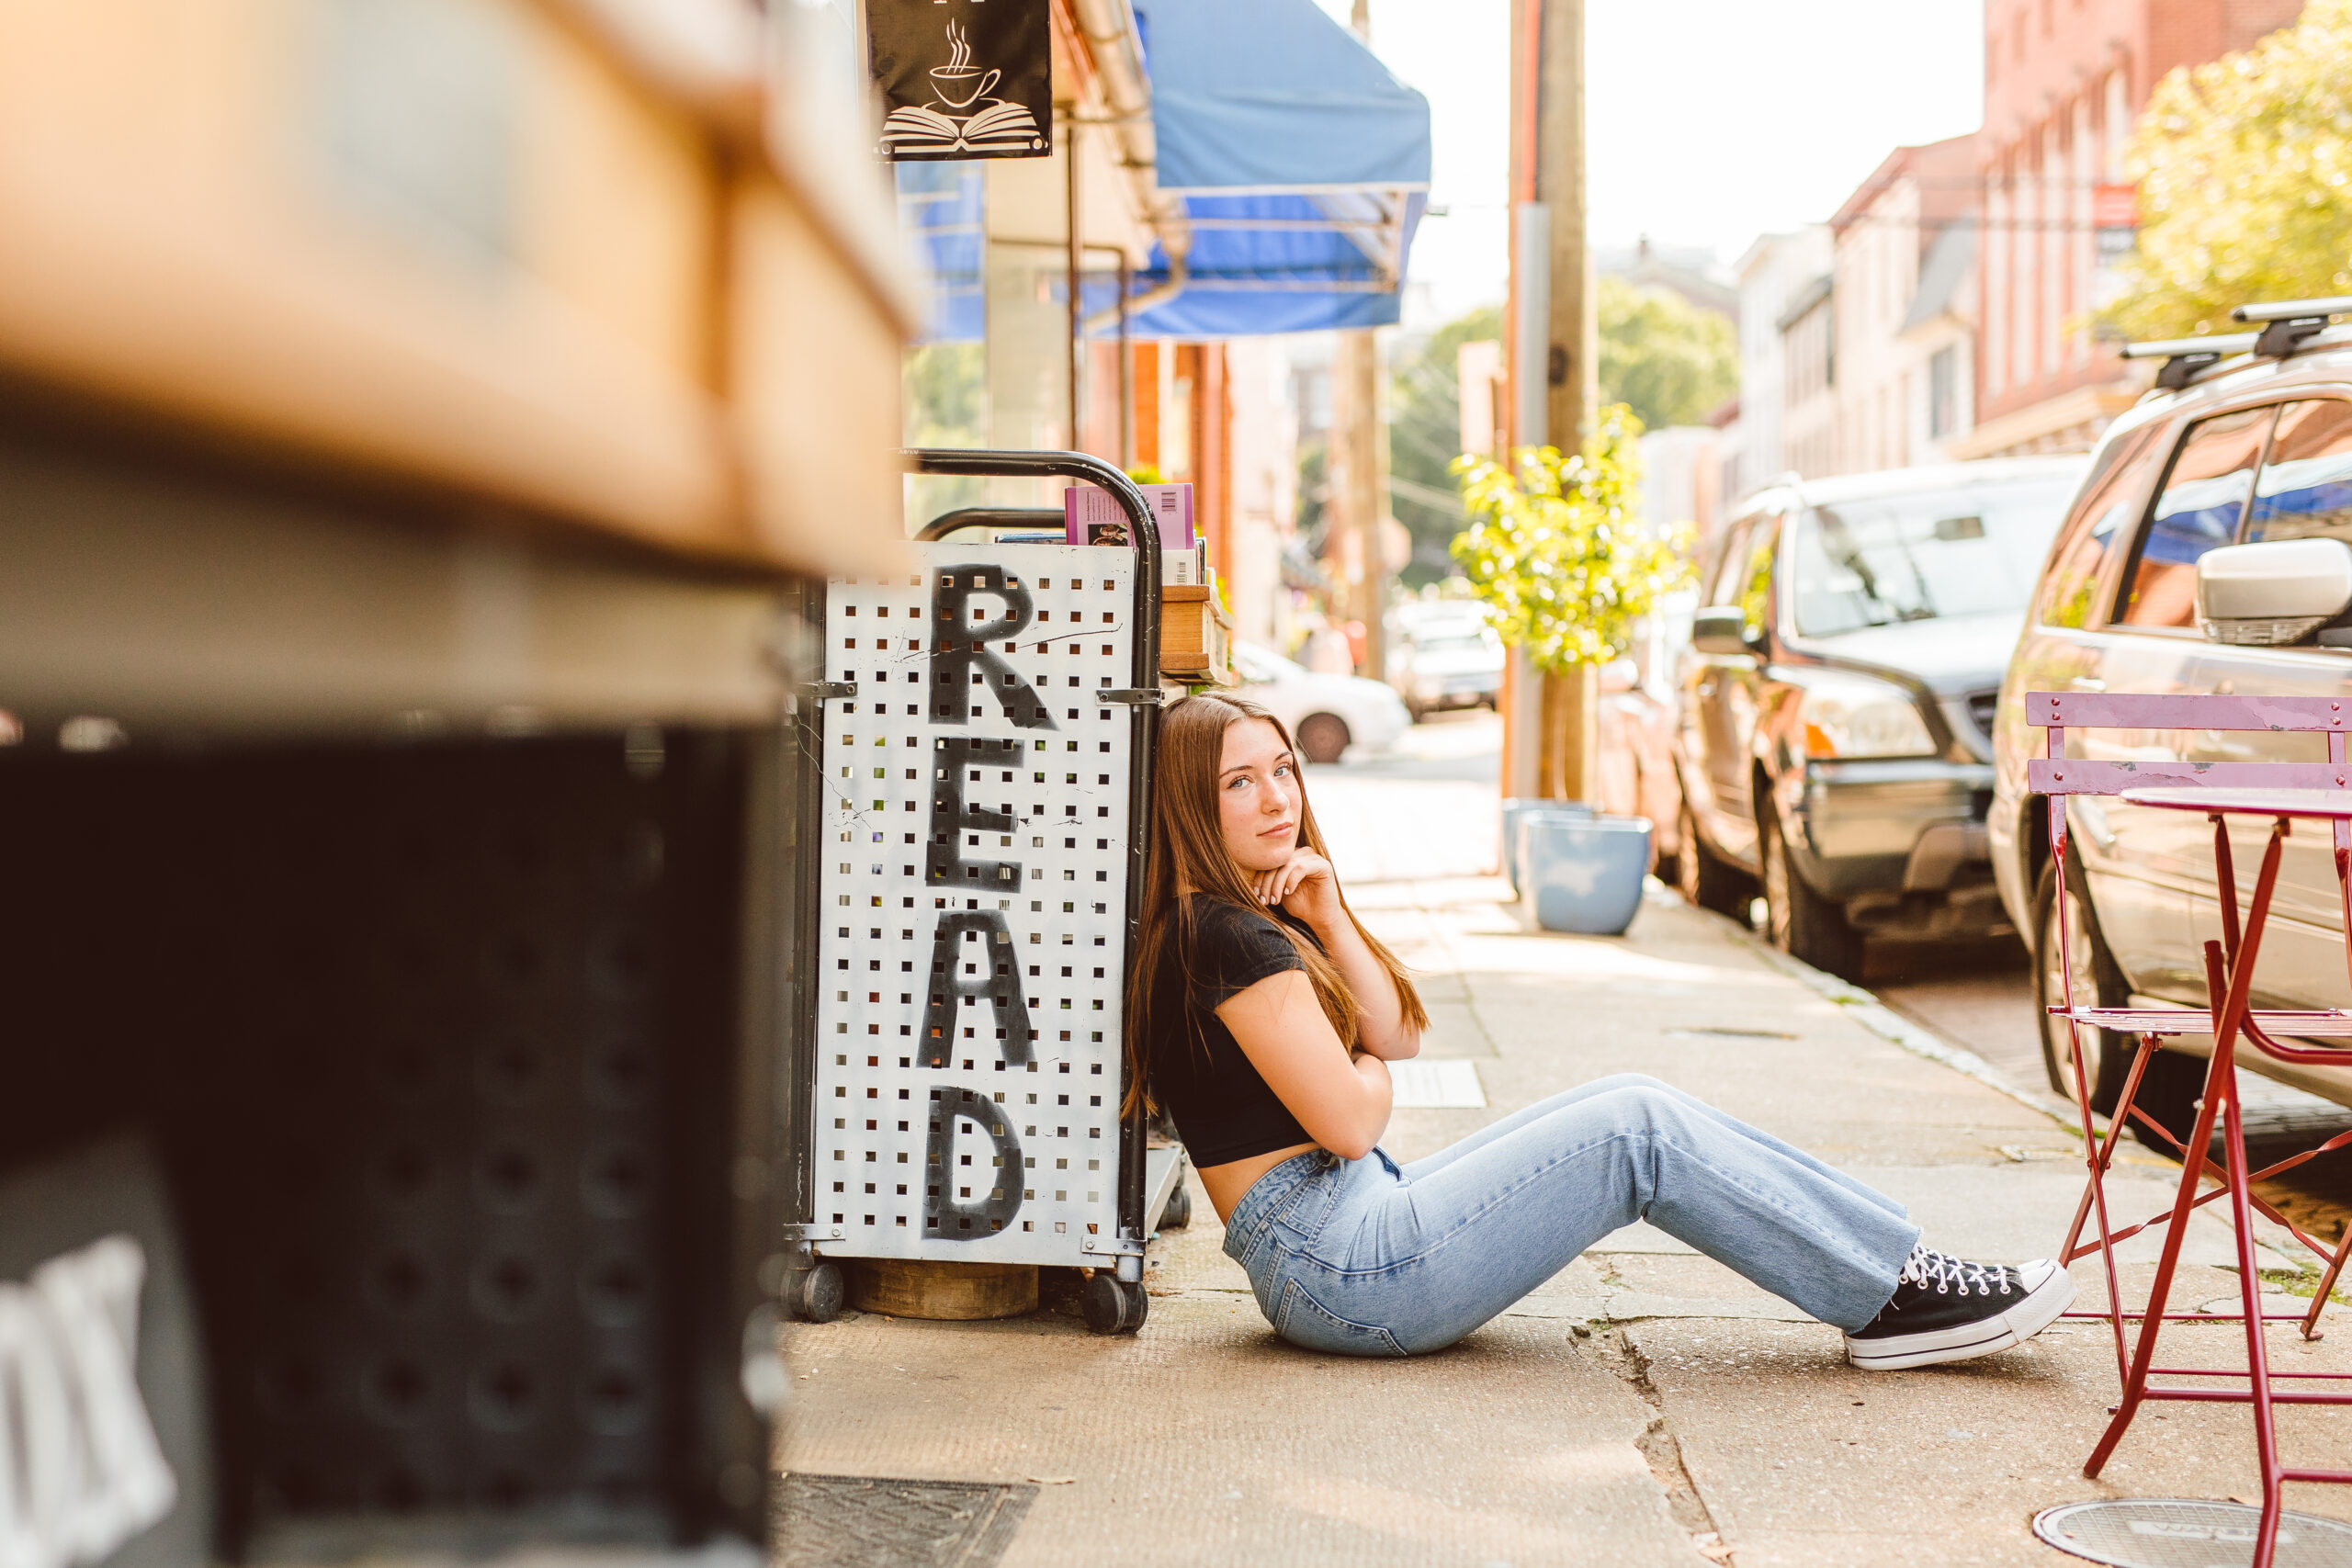 Downtown senior portraits at Old Fox Books 